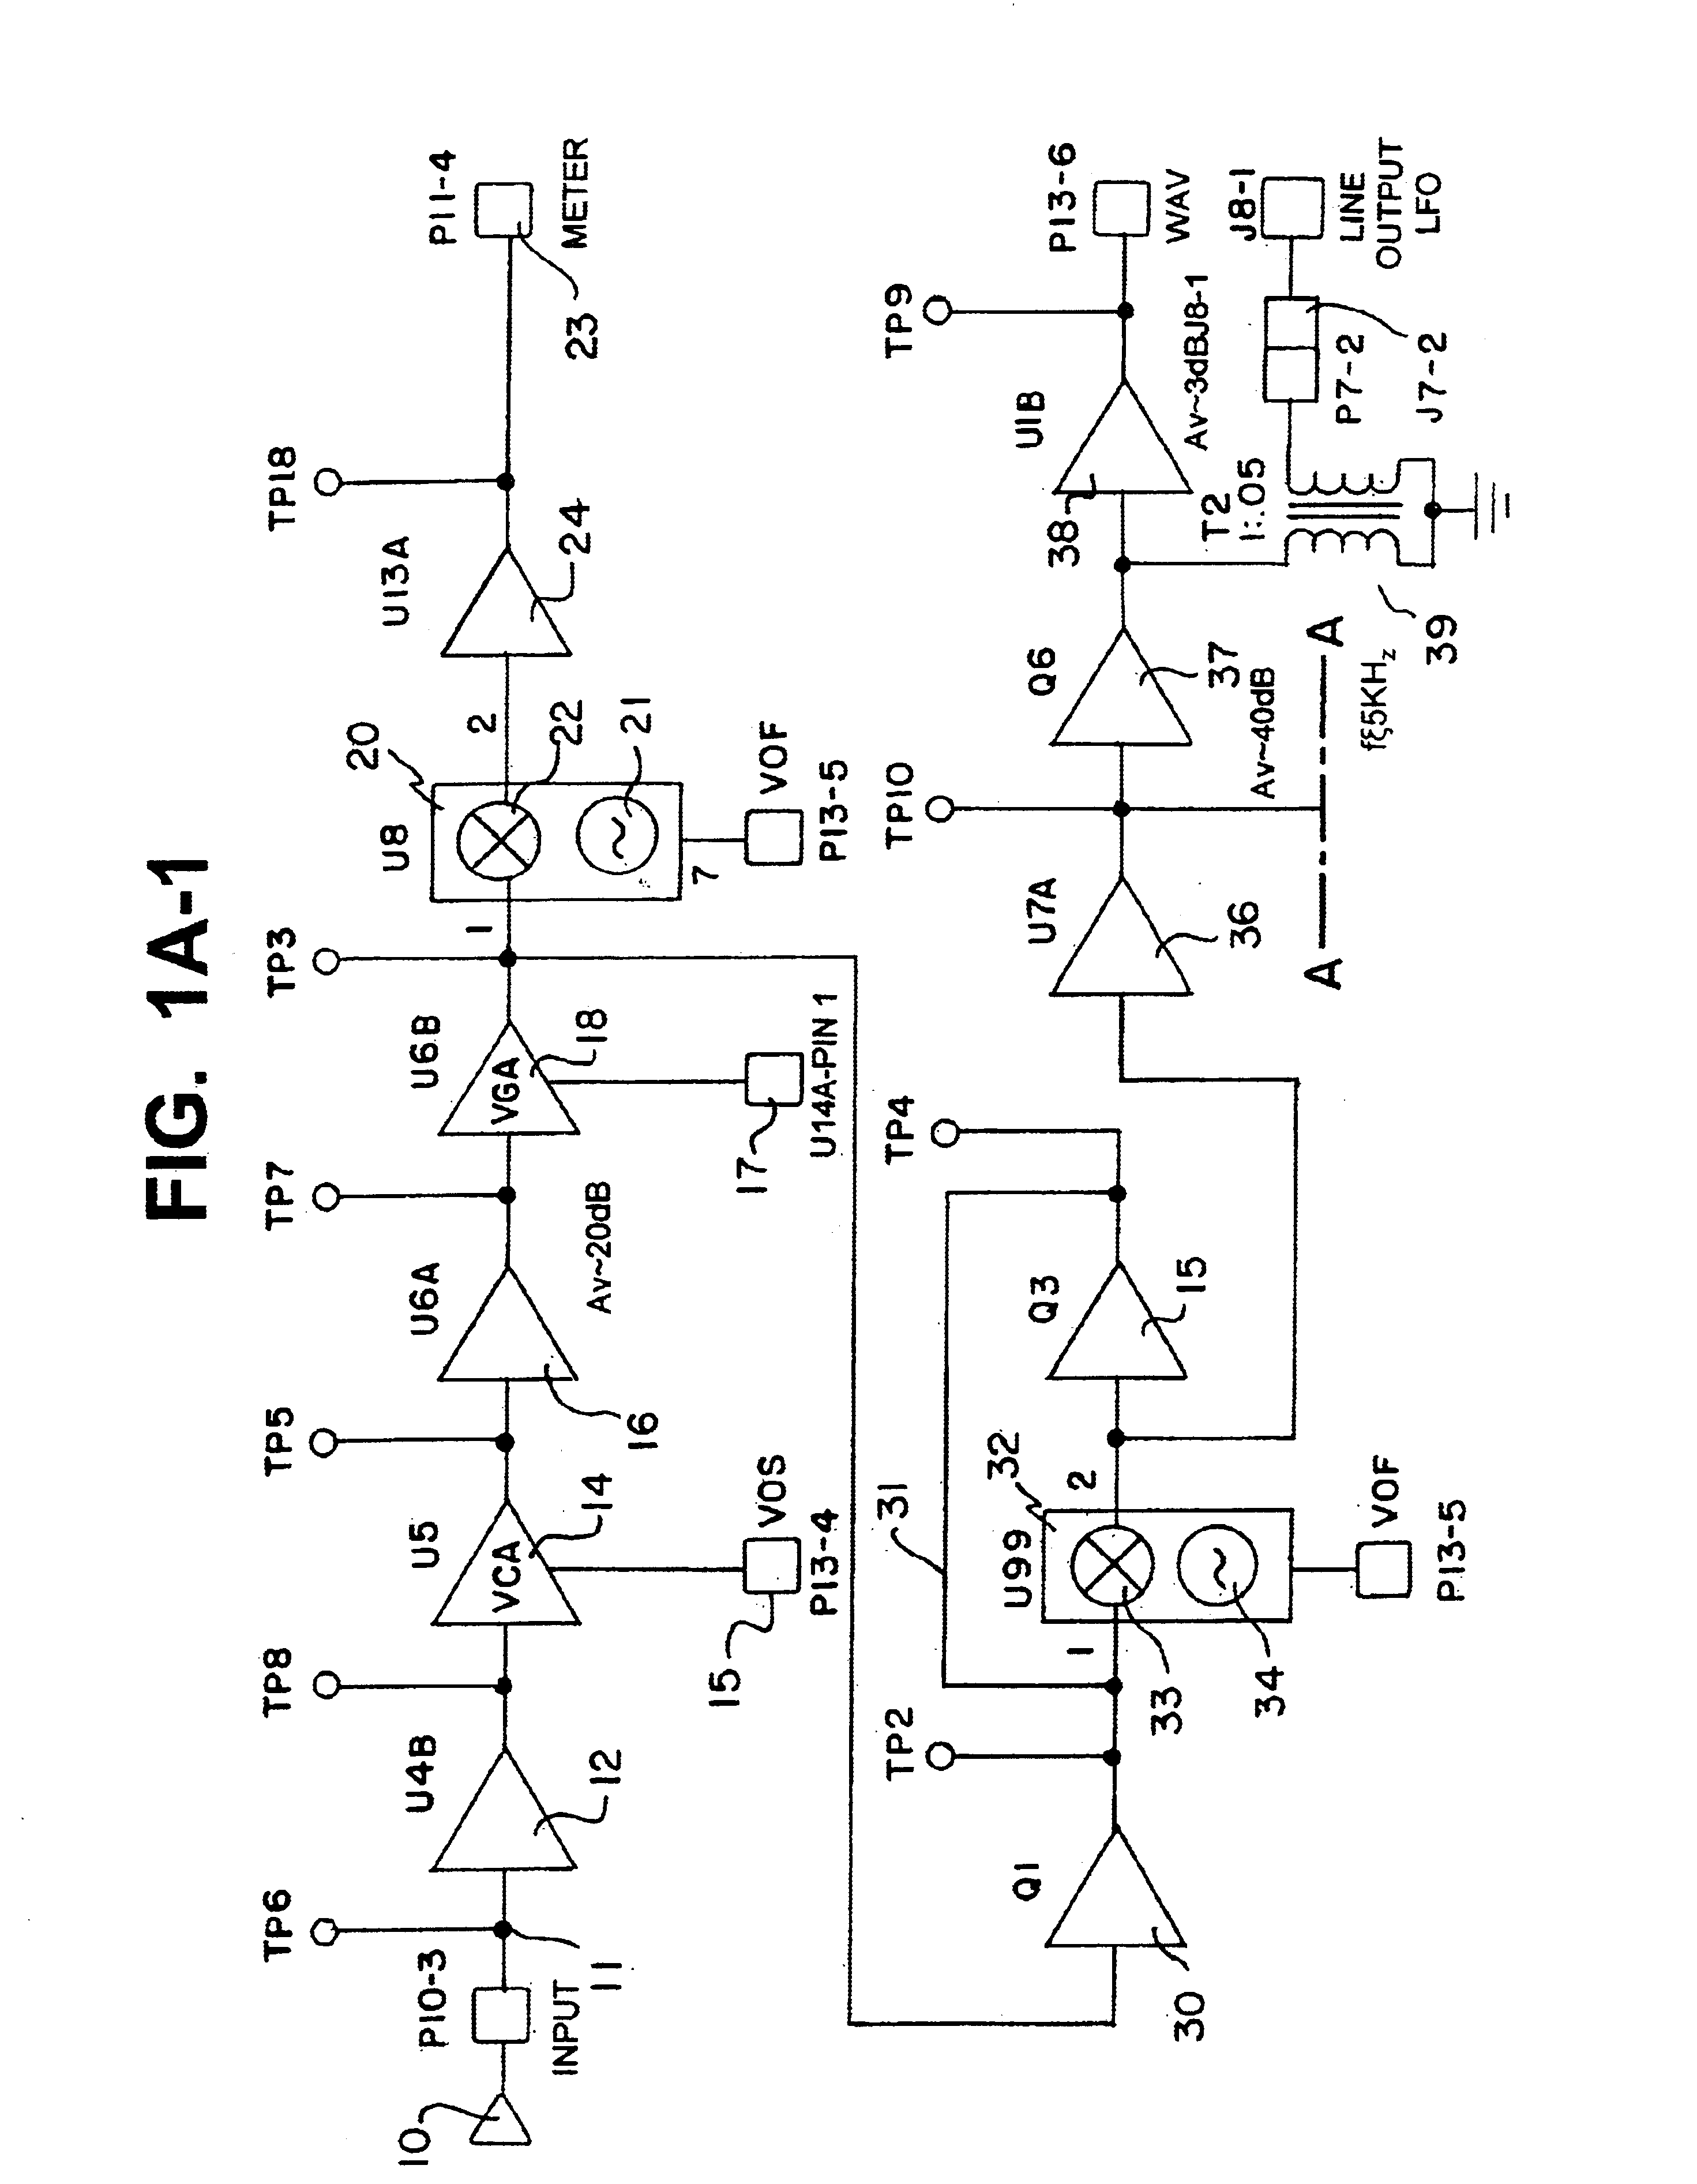 System and method for heterodyning an ultrasonic signal